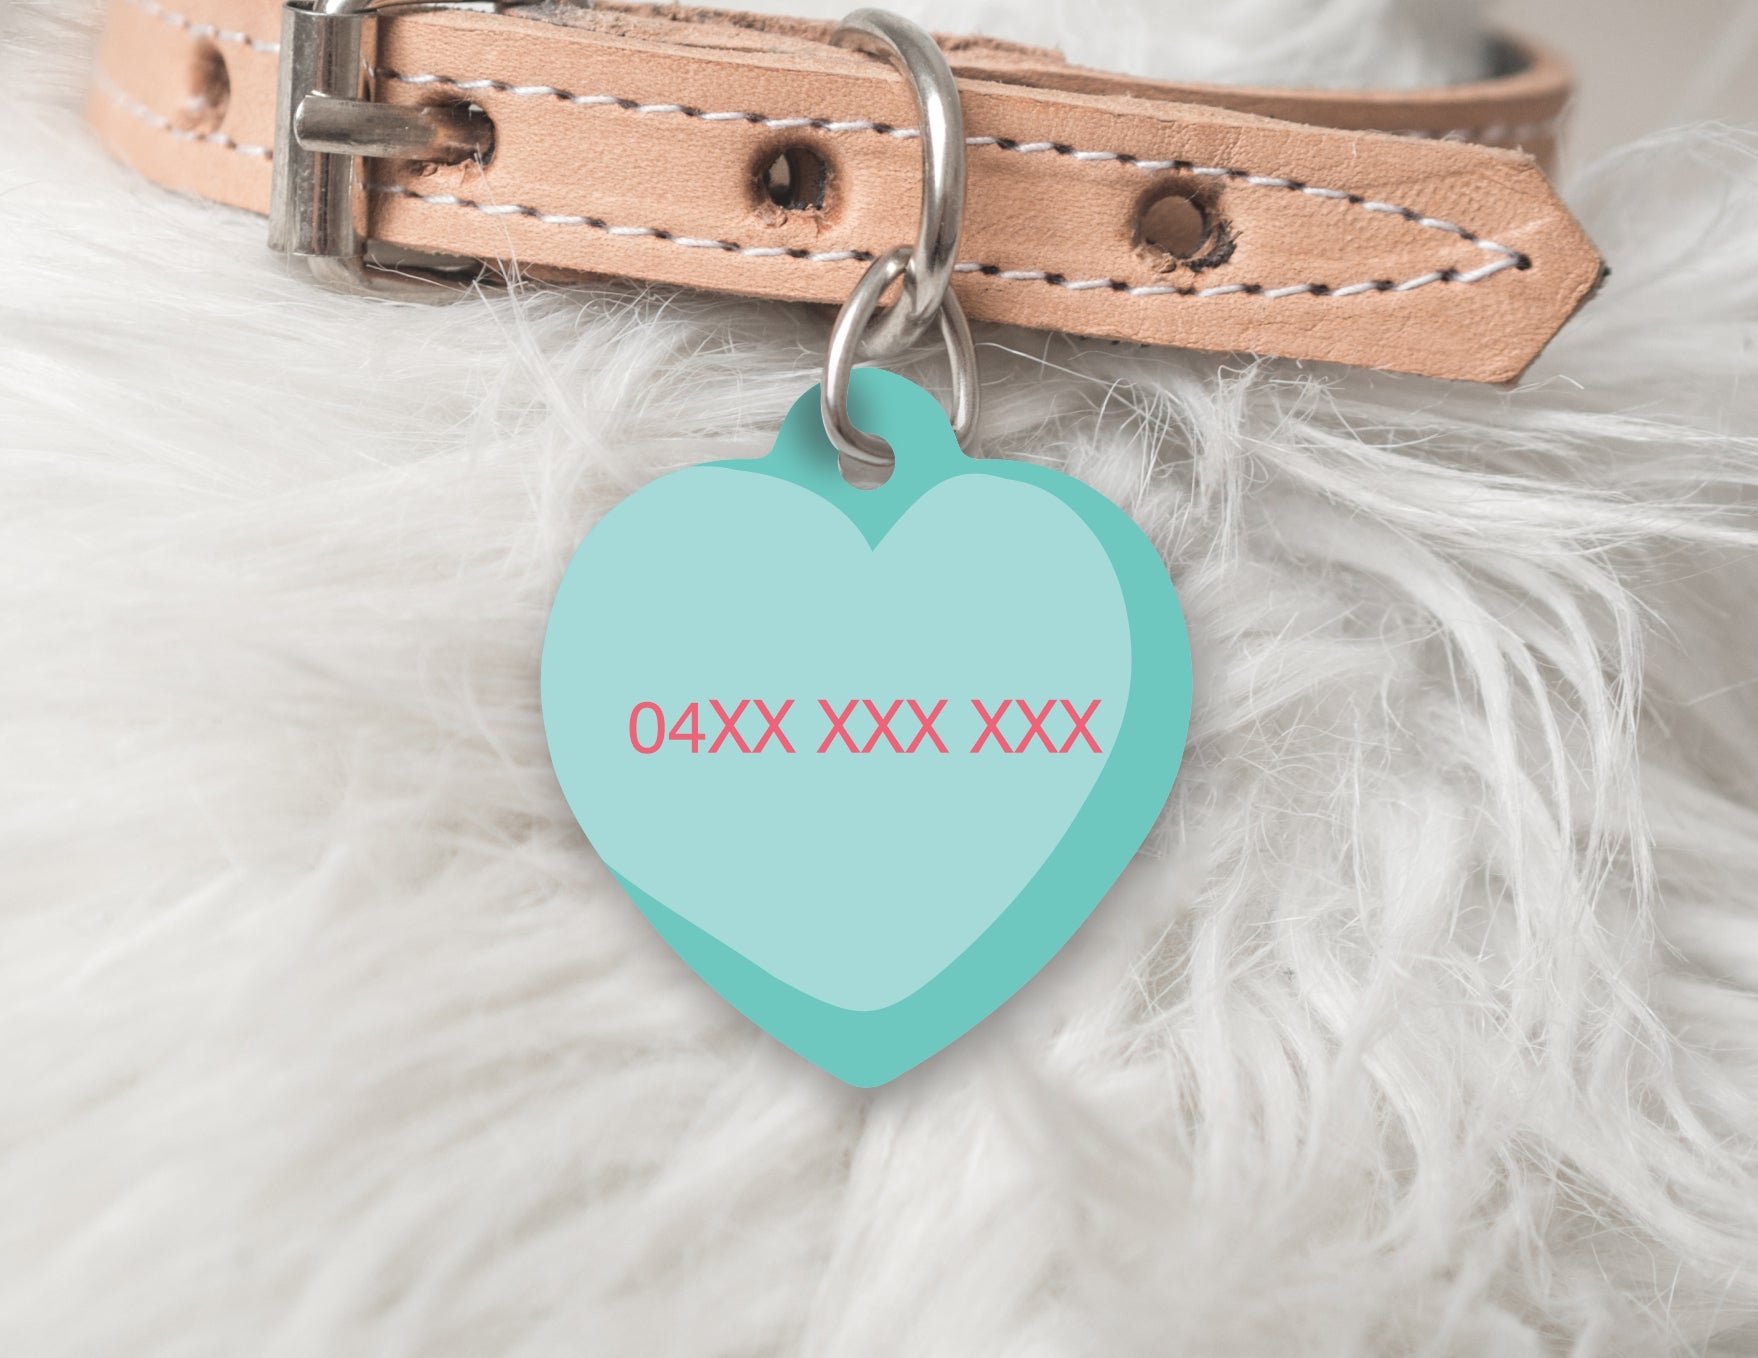 CANDY HEART Solid Personalised Dog or Cat ID Tag - AQUA BLUE